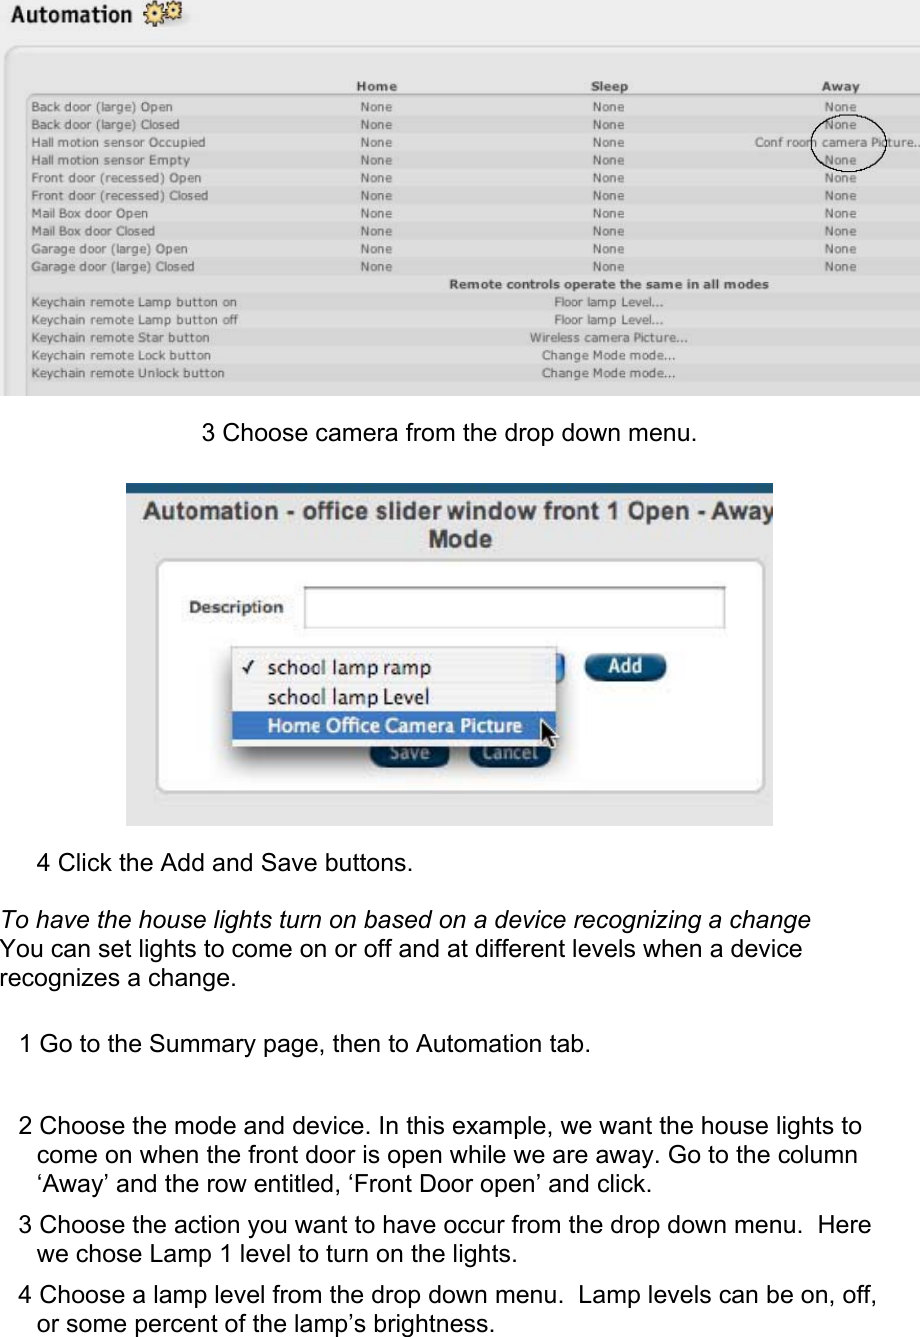  3 Choose camera from the drop down menu.   4 Click the Add and Save buttons.  To have the house lights turn on based on a device recognizing a change  You can set lights to come on or off and at different levels when a device recognizes a change.  1 Go to the Summary page, then to Automation tab.  2 Choose the mode and device. In this example, we want the house lights to come on when the front door is open while we are away. Go to the column ‘Away’ and the row entitled, ‘Front Door open’ and click.  3 Choose the action you want to have occur from the drop down menu.  Here we chose Lamp 1 level to turn on the lights.  4 Choose a lamp level from the drop down menu.  Lamp levels can be on, off, or some percent of the lamp’s brightness.  